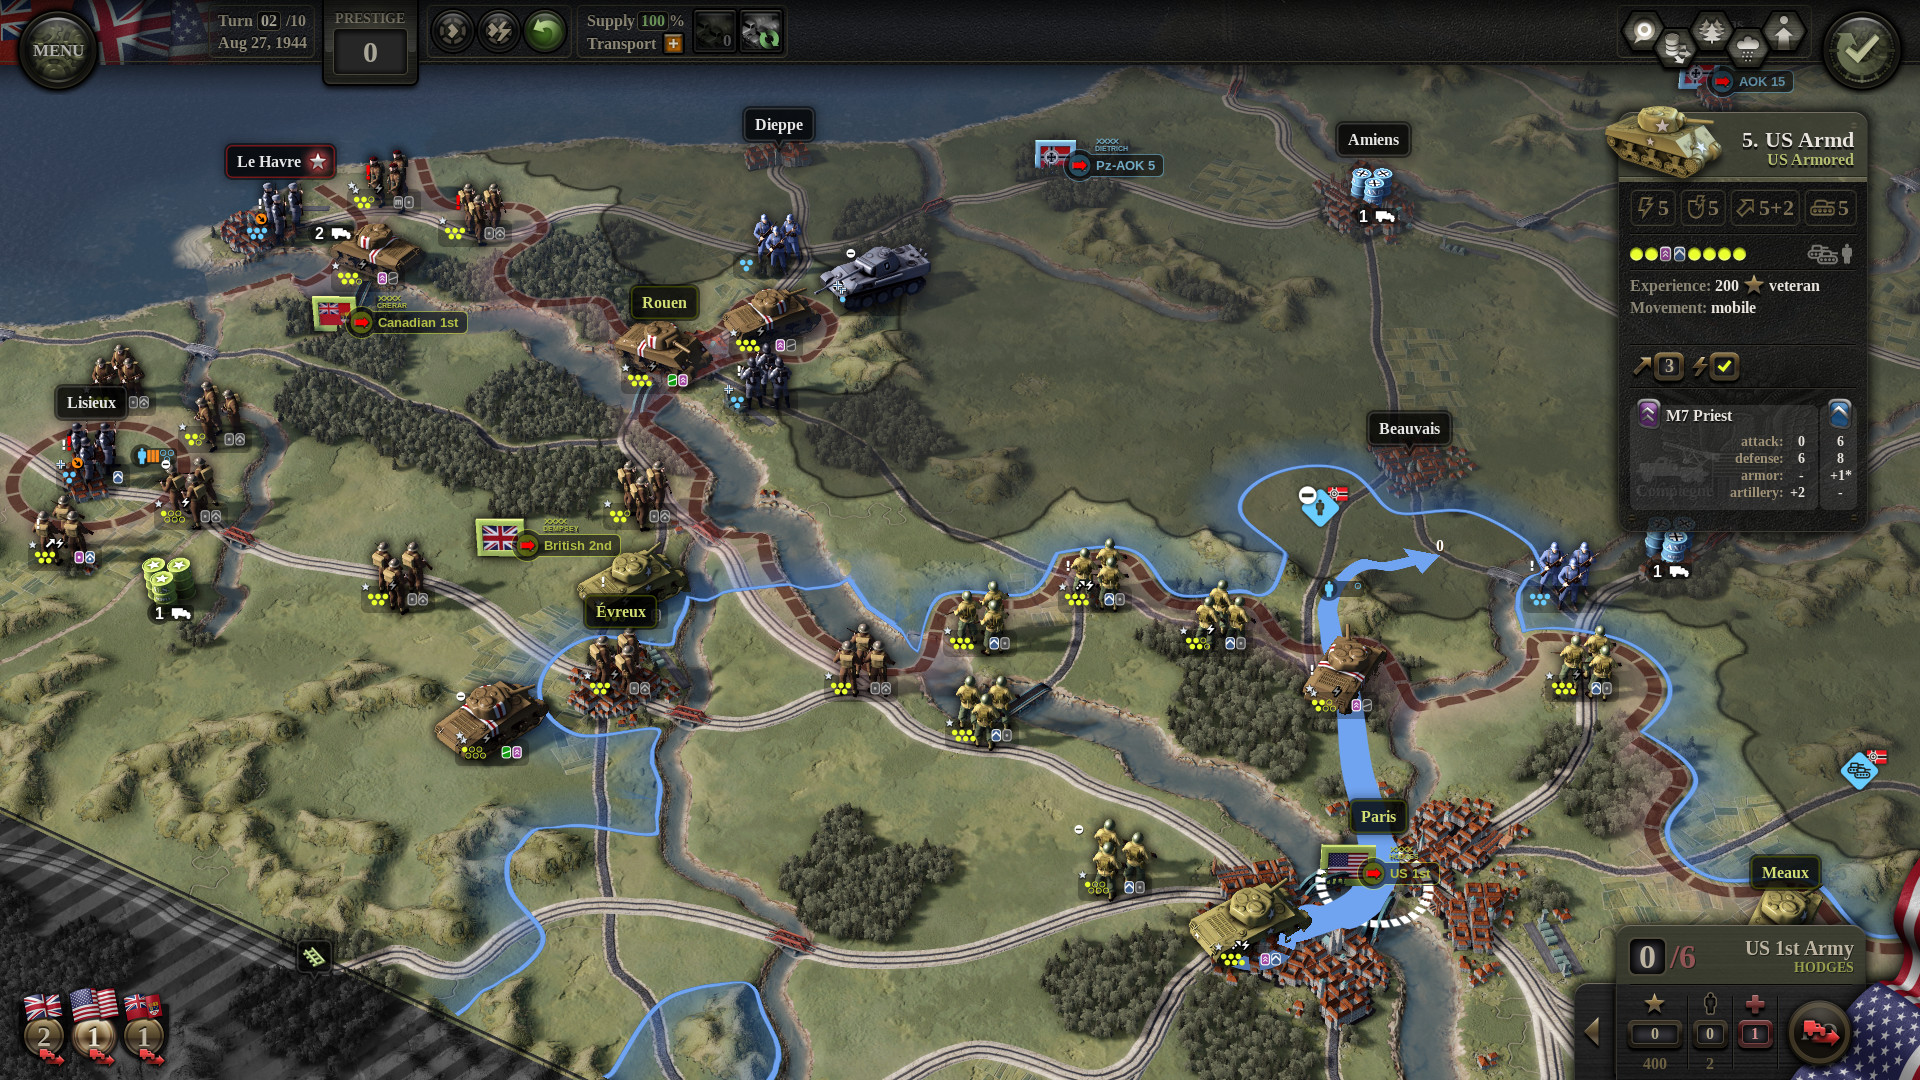 Best war games: Unity of Command 2. Image shows a map with various strategic routes and soldiers laid out on it.